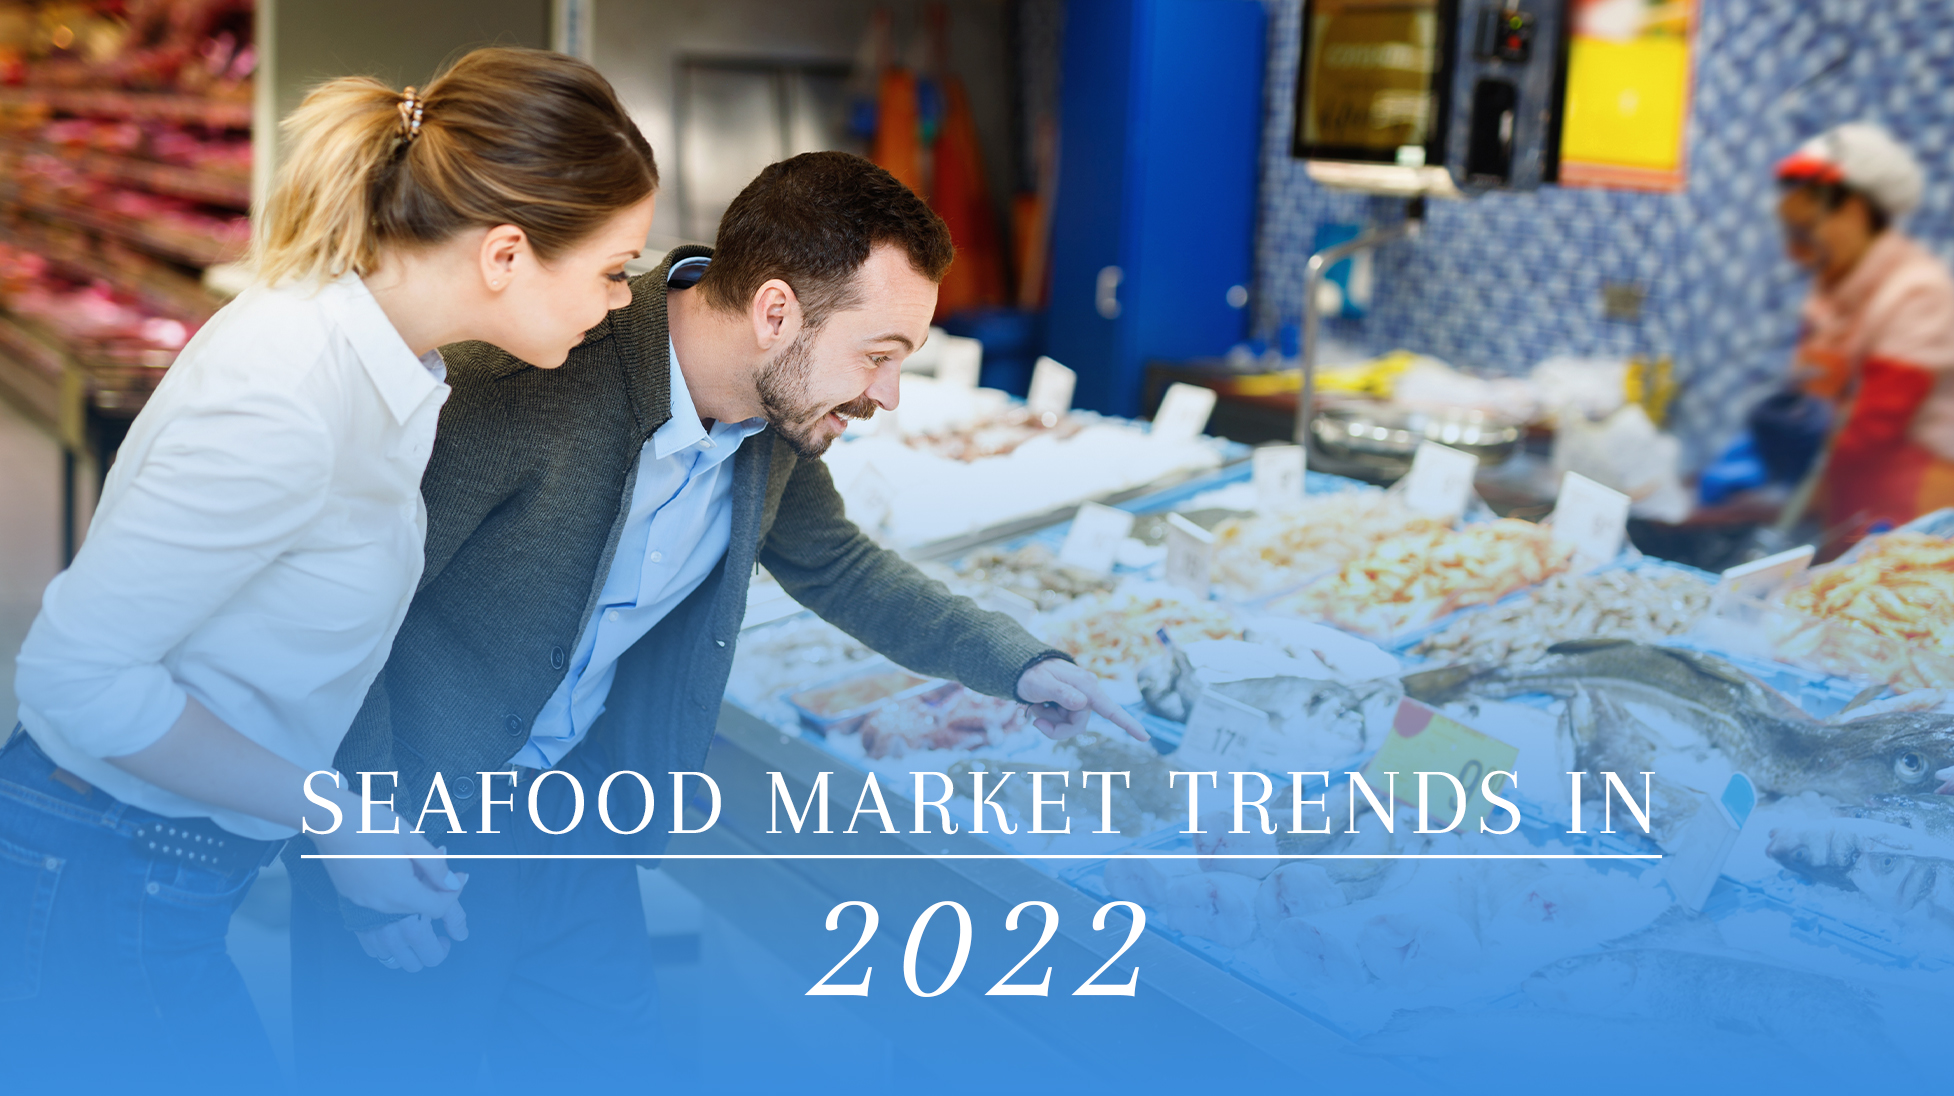 Seafood Market Trends in 2022: Heartland Catfish Offers a Quality, Frozen, Protein Choice